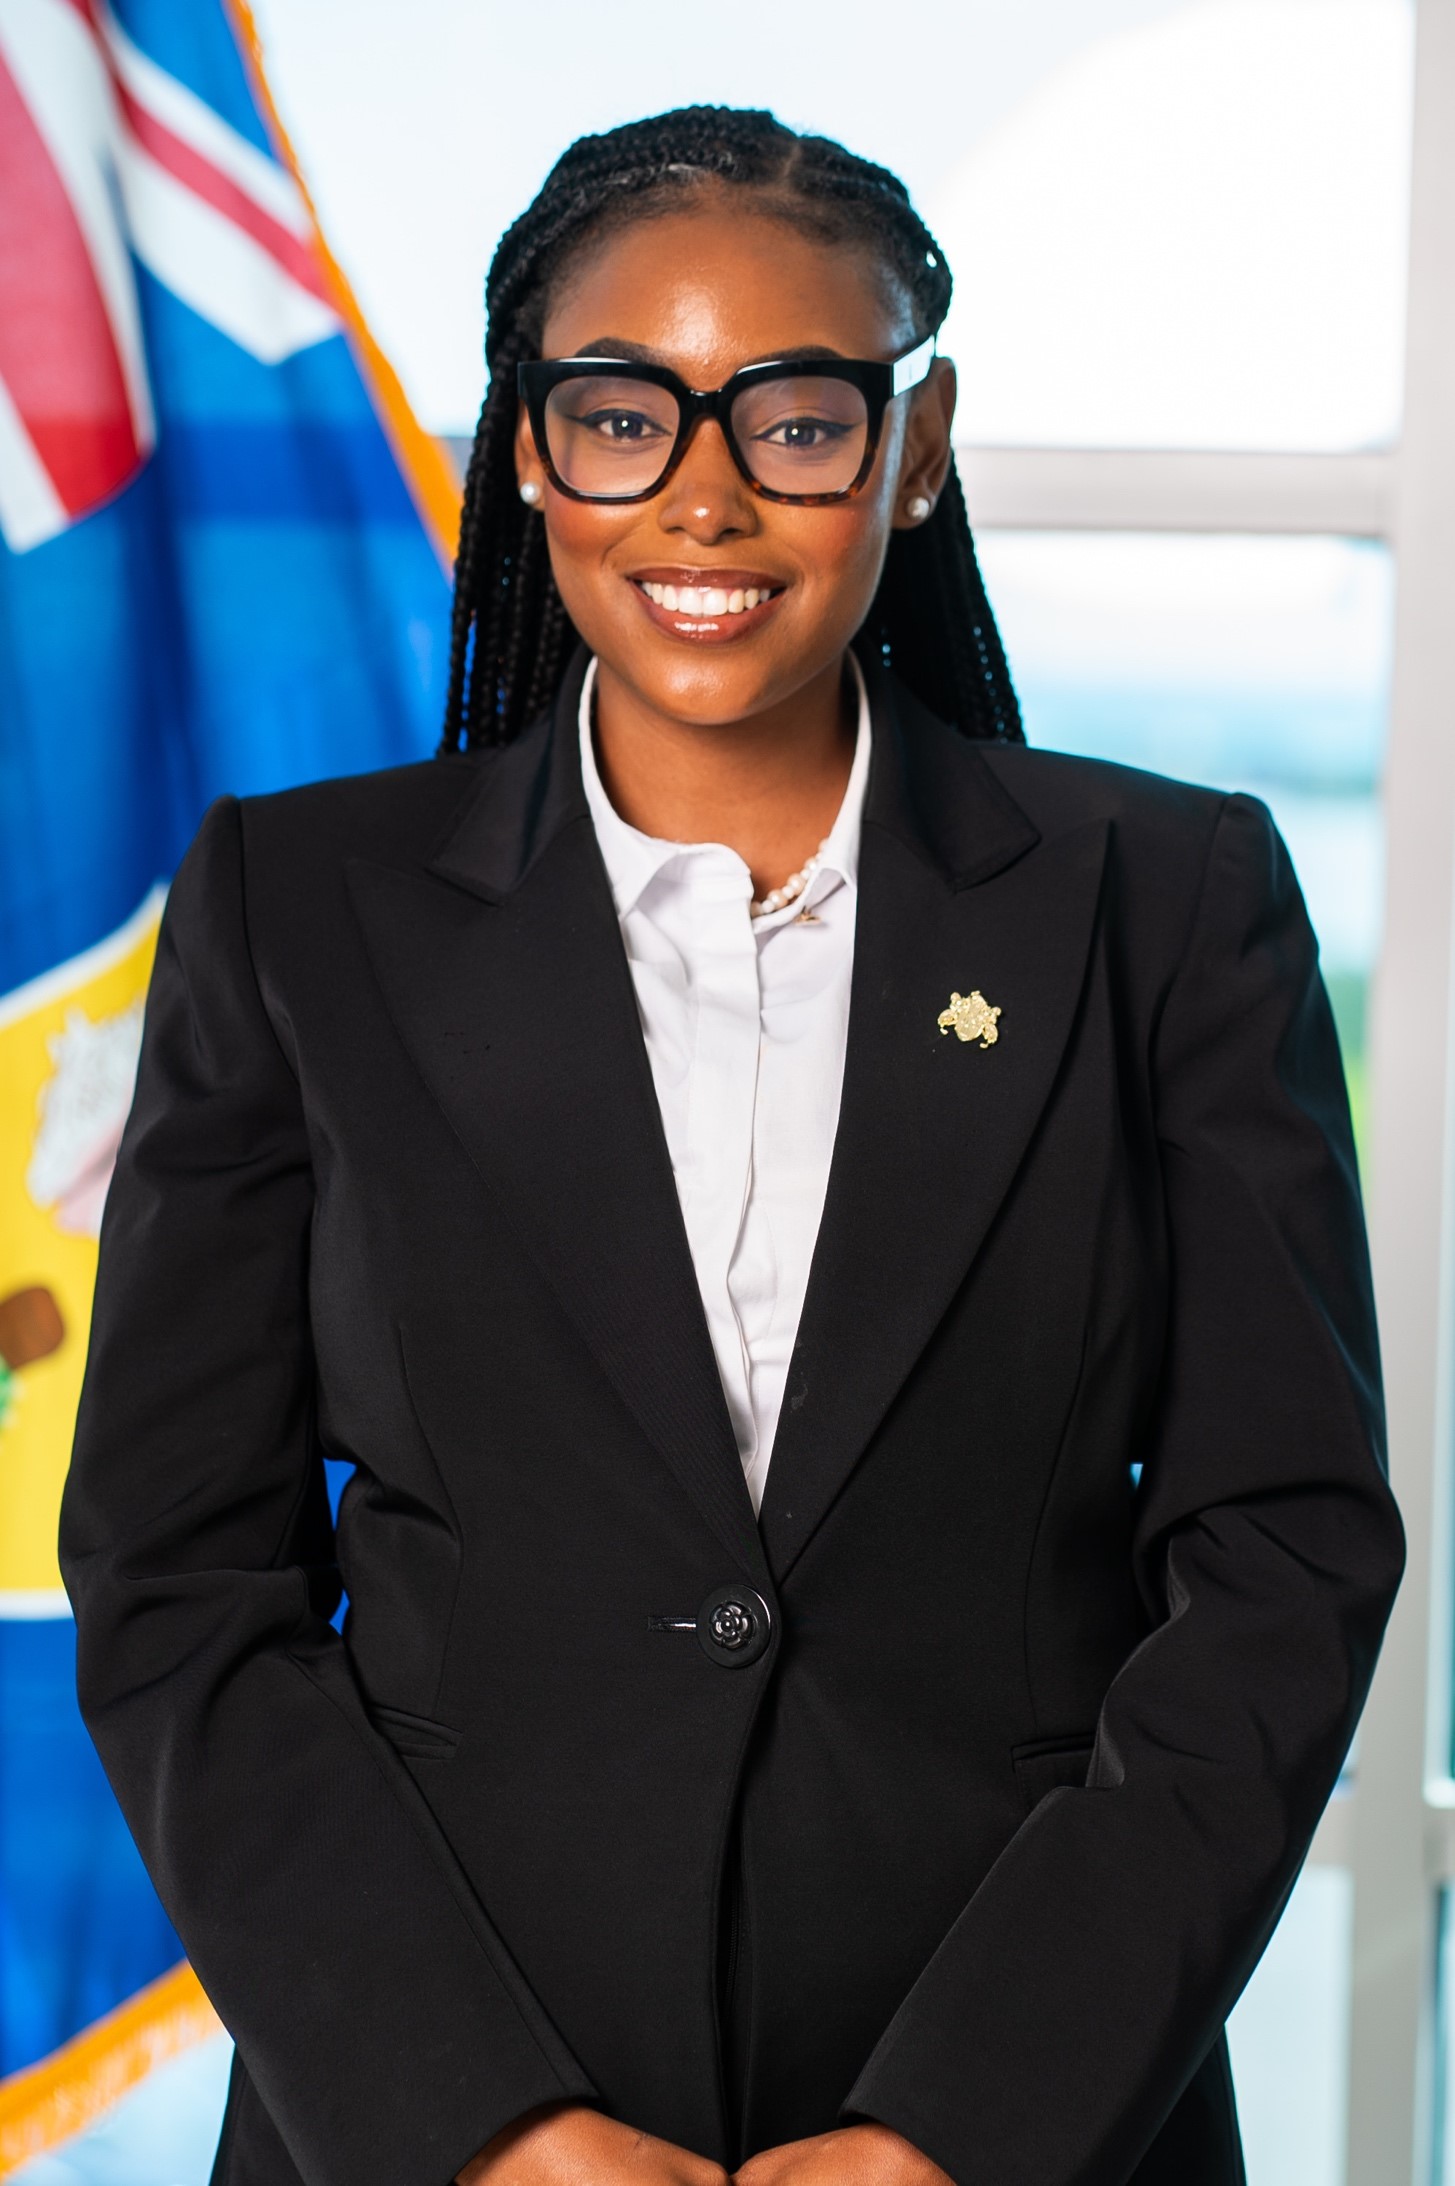 TESHARNA WILLIAMS APPOINTED AS CROWN COUNSEL